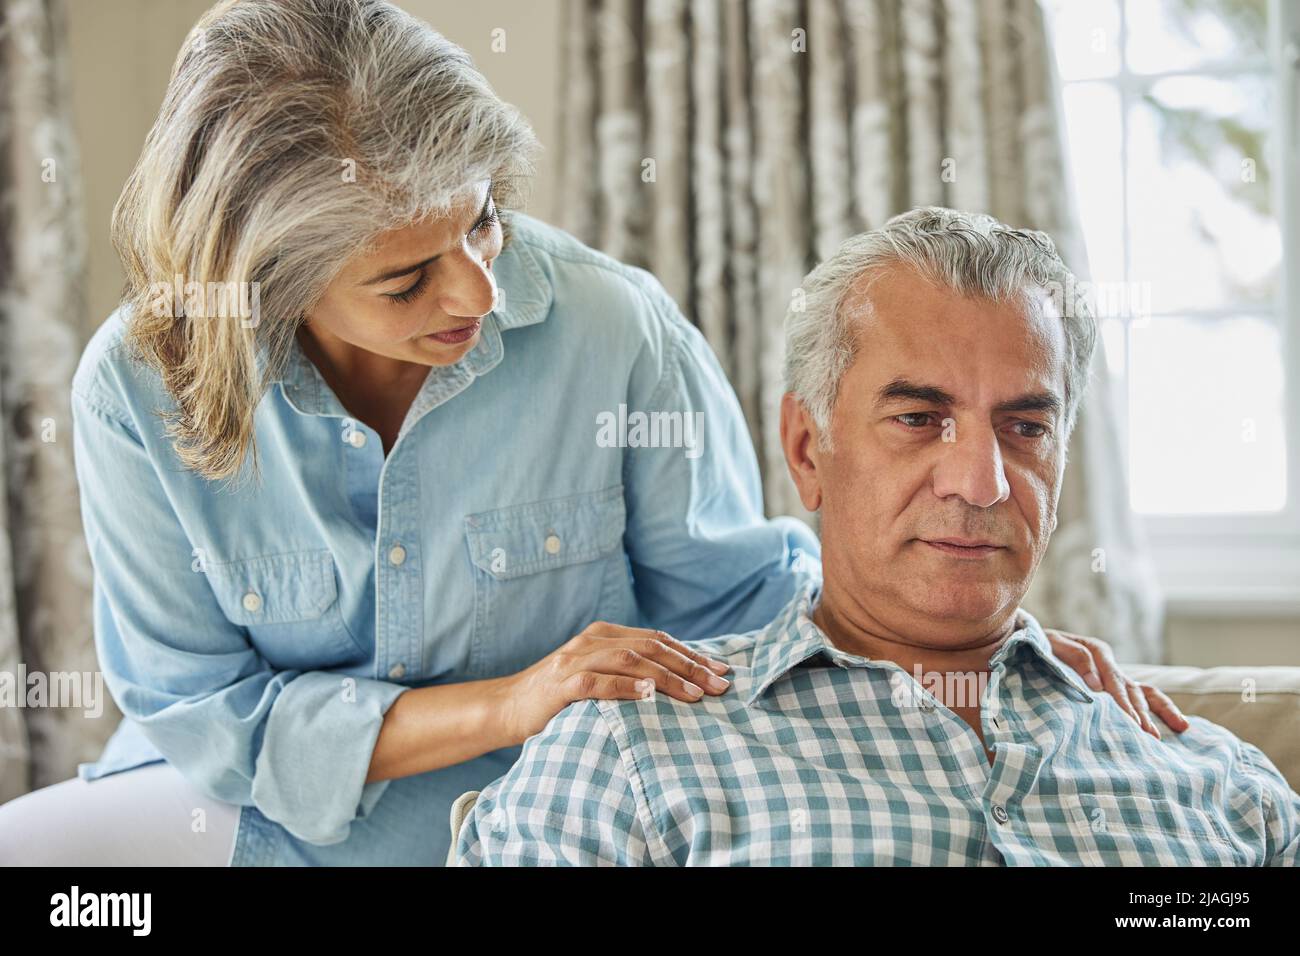 Mature Woman Comforting Man With Depression At Home Stock Photo